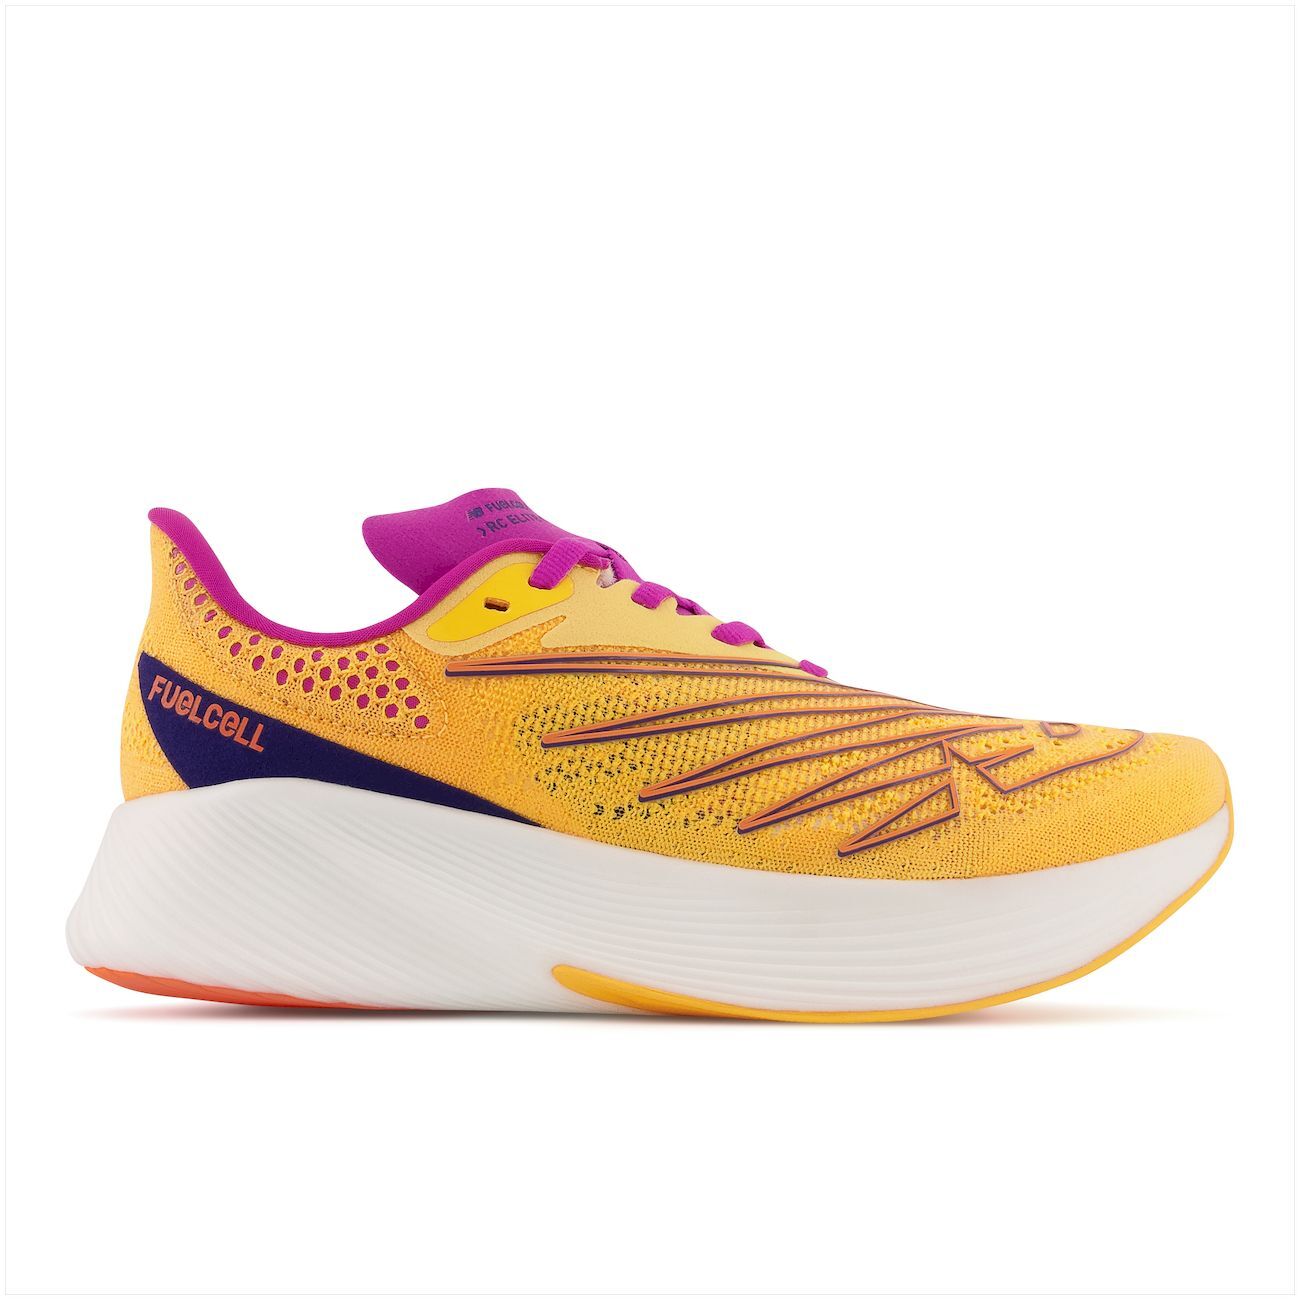 New Balance Fuelcell RC Elite V2 - Chaussures running femme | Hardloop